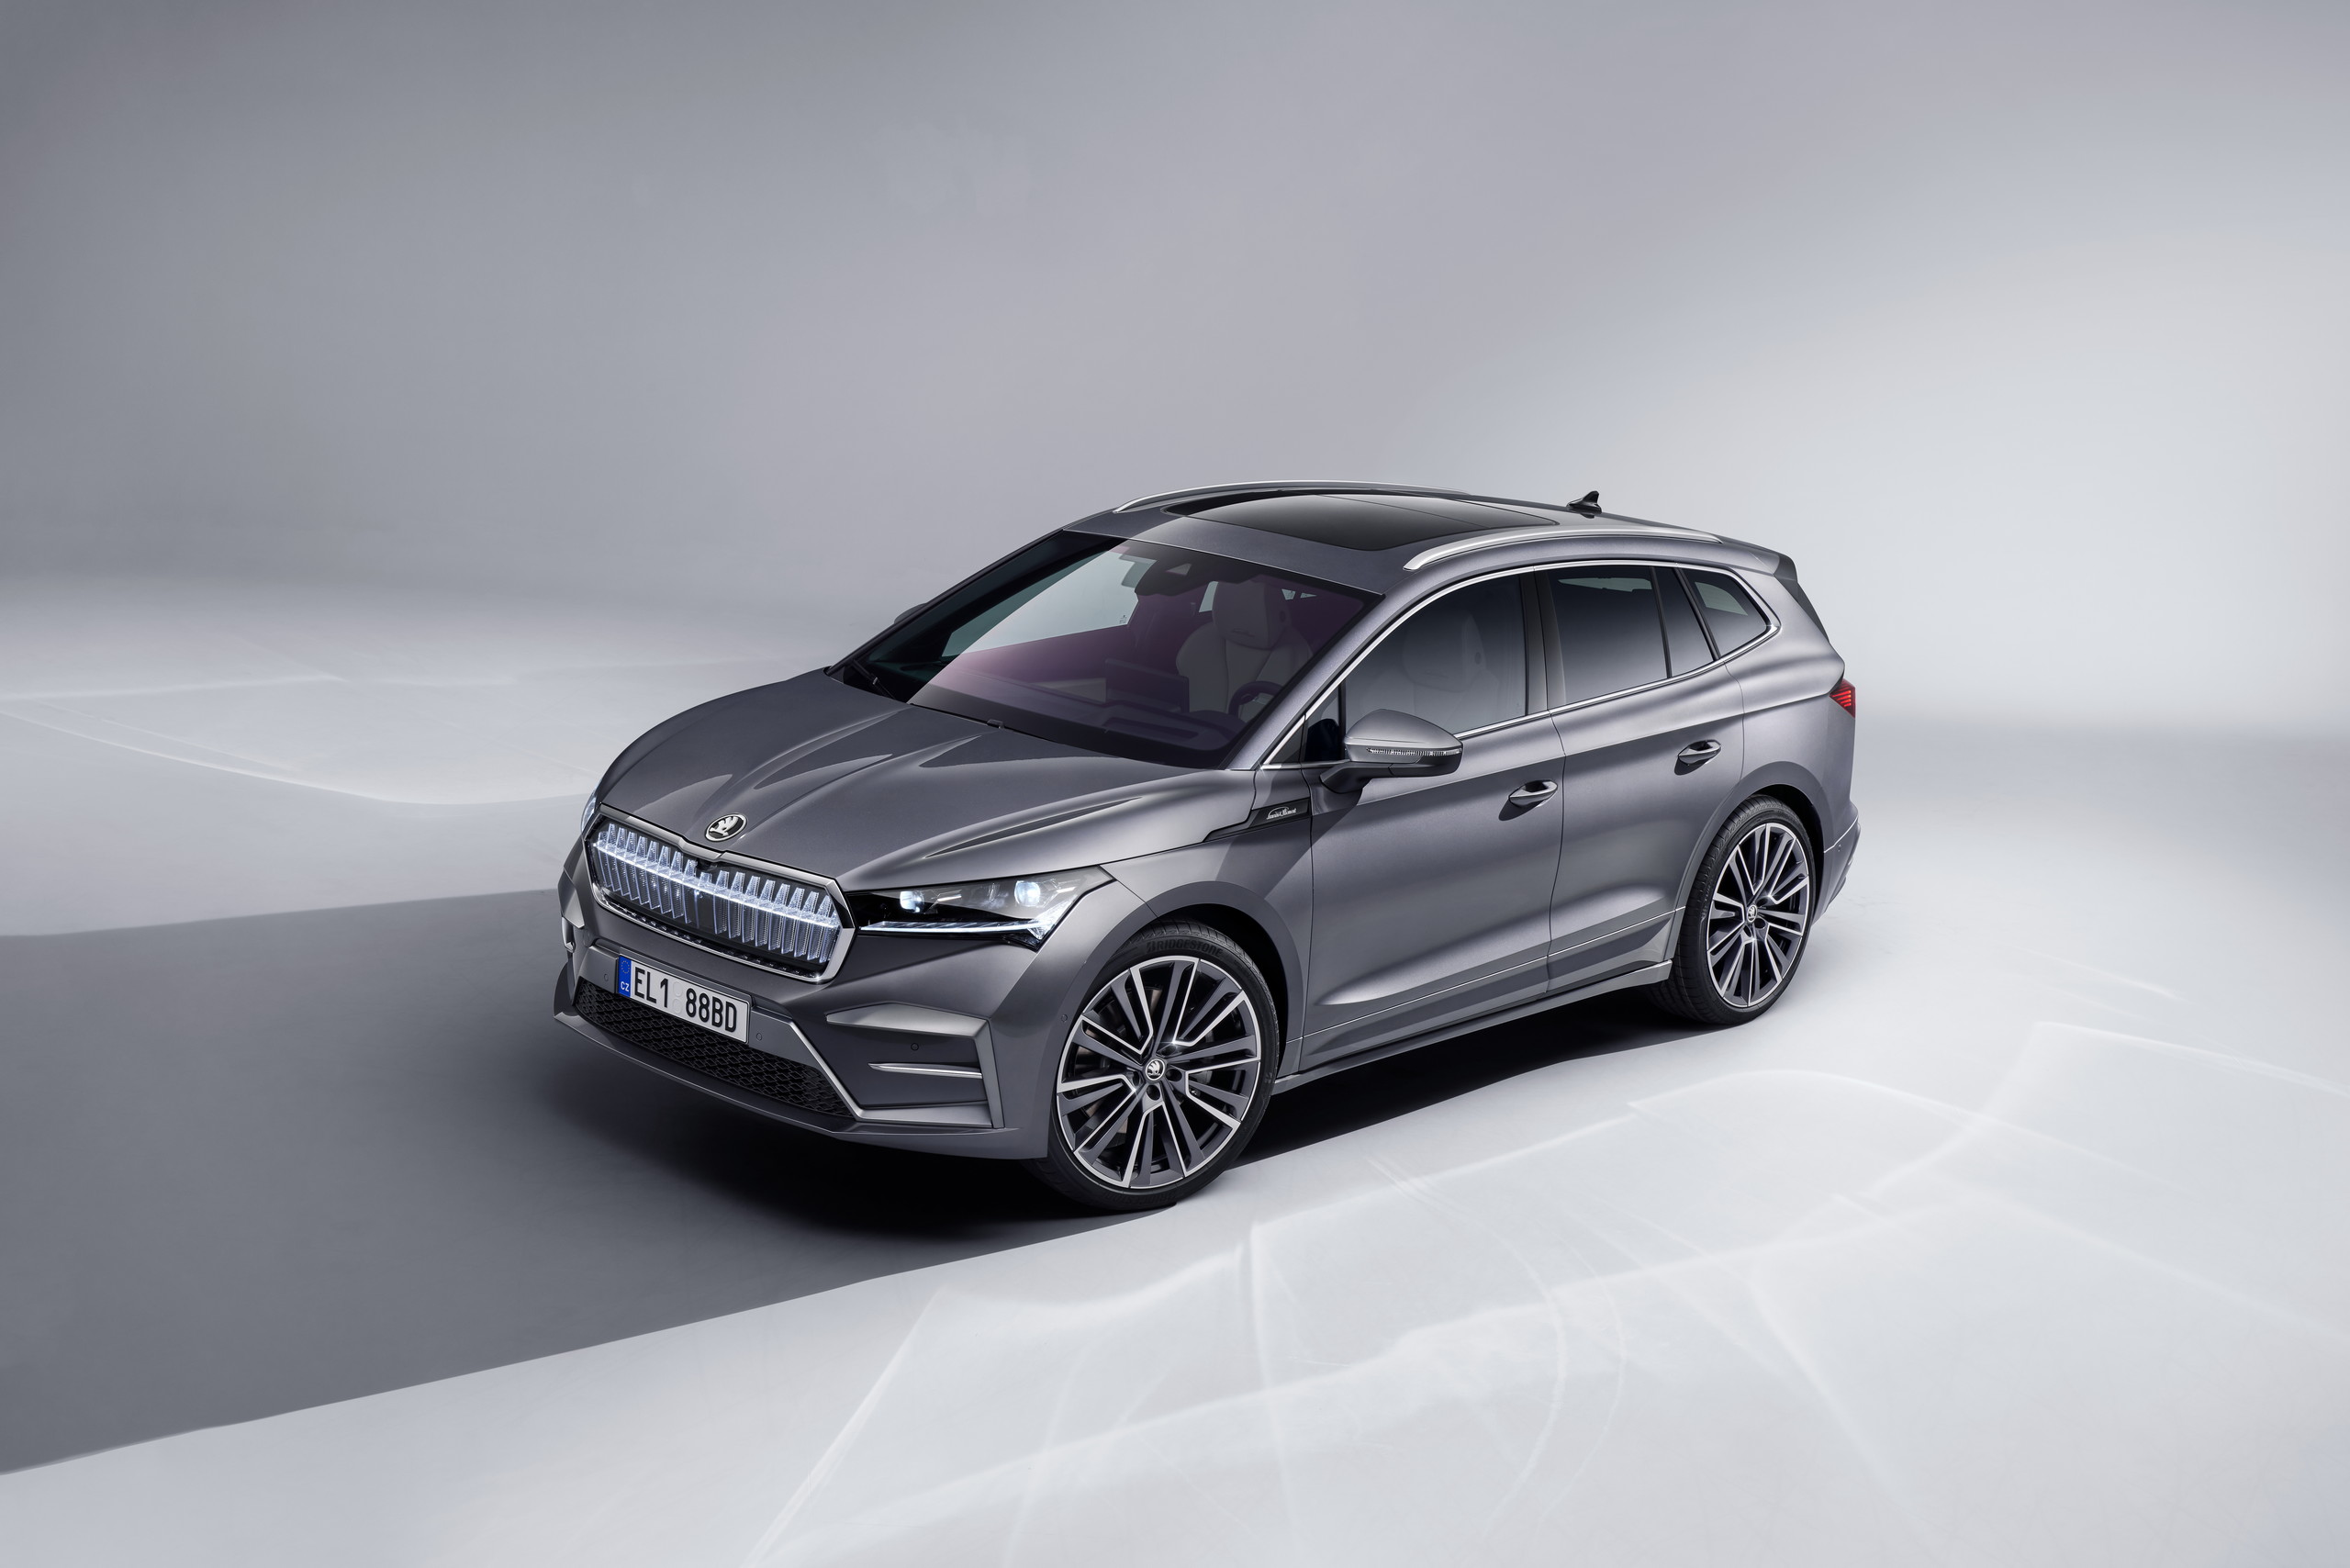 https://s1.cdn.autoevolution.com/images/news/skoda-enyaq-joins-the-l-k-family-with-premium-upgrades-and-improved-performance-215418_1.jpg